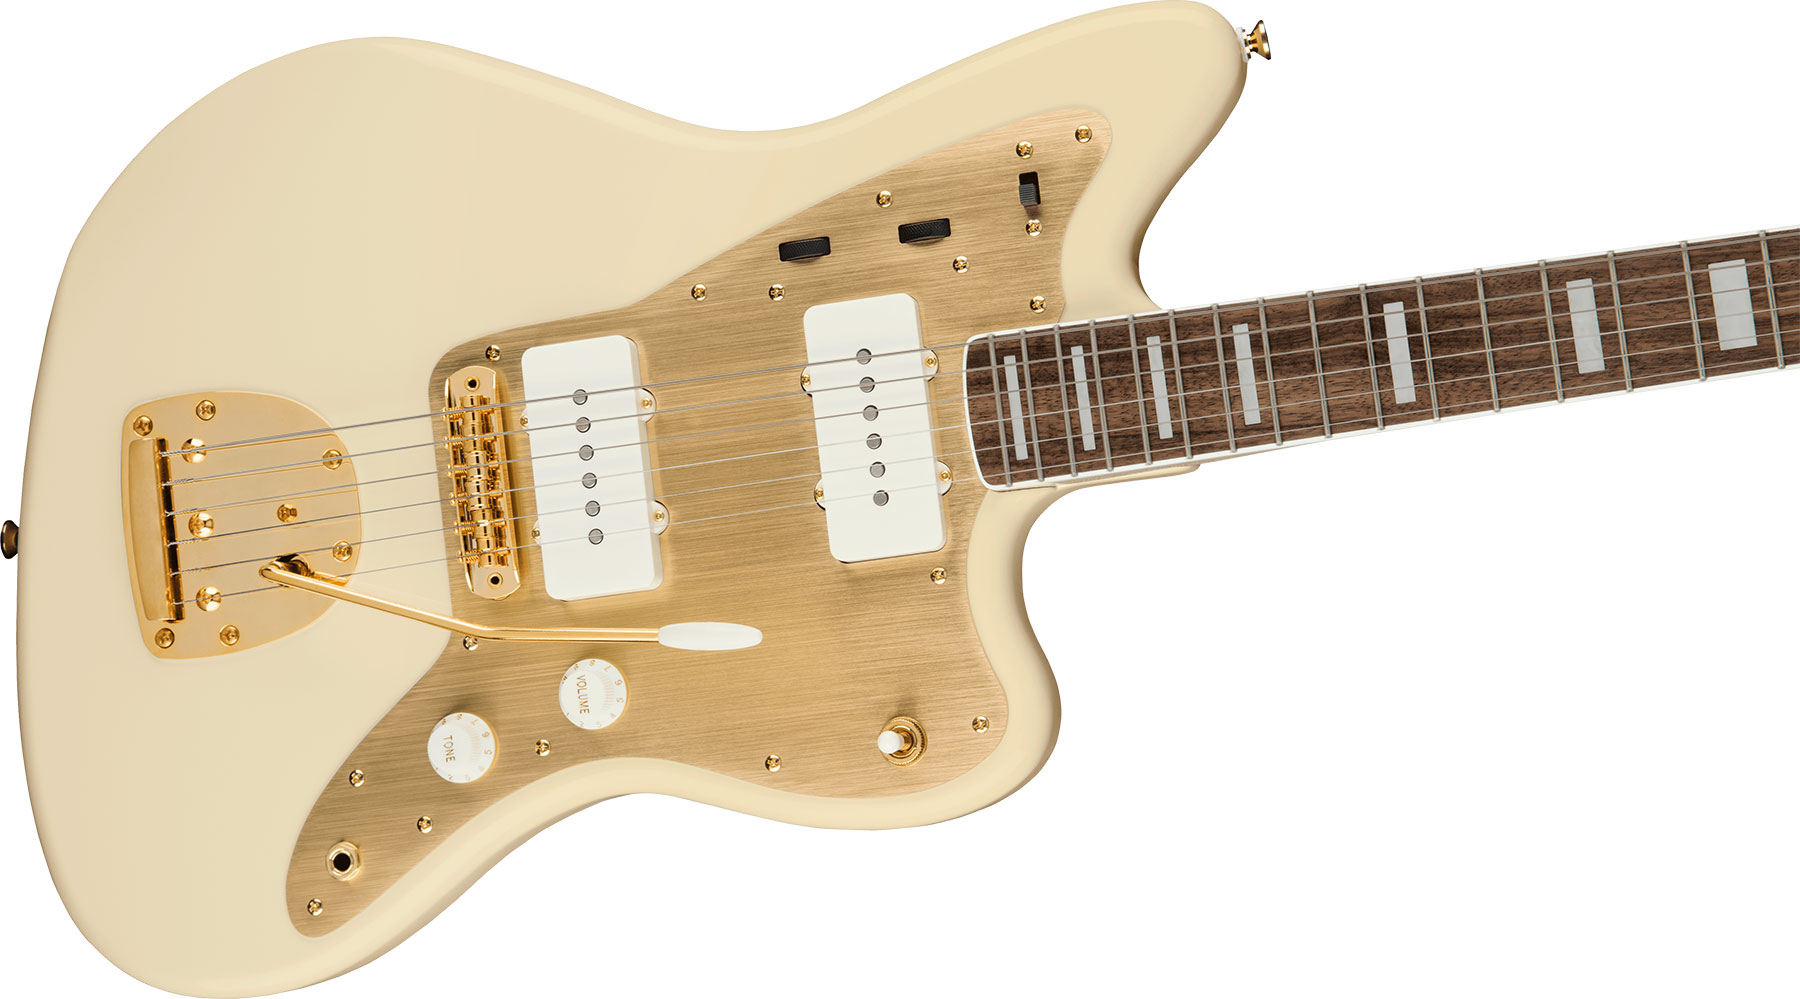 Squier Jazzmaster 40th Anniversary Gold Edition Lau - Olympic White - Retro rock electric guitar - Variation 2